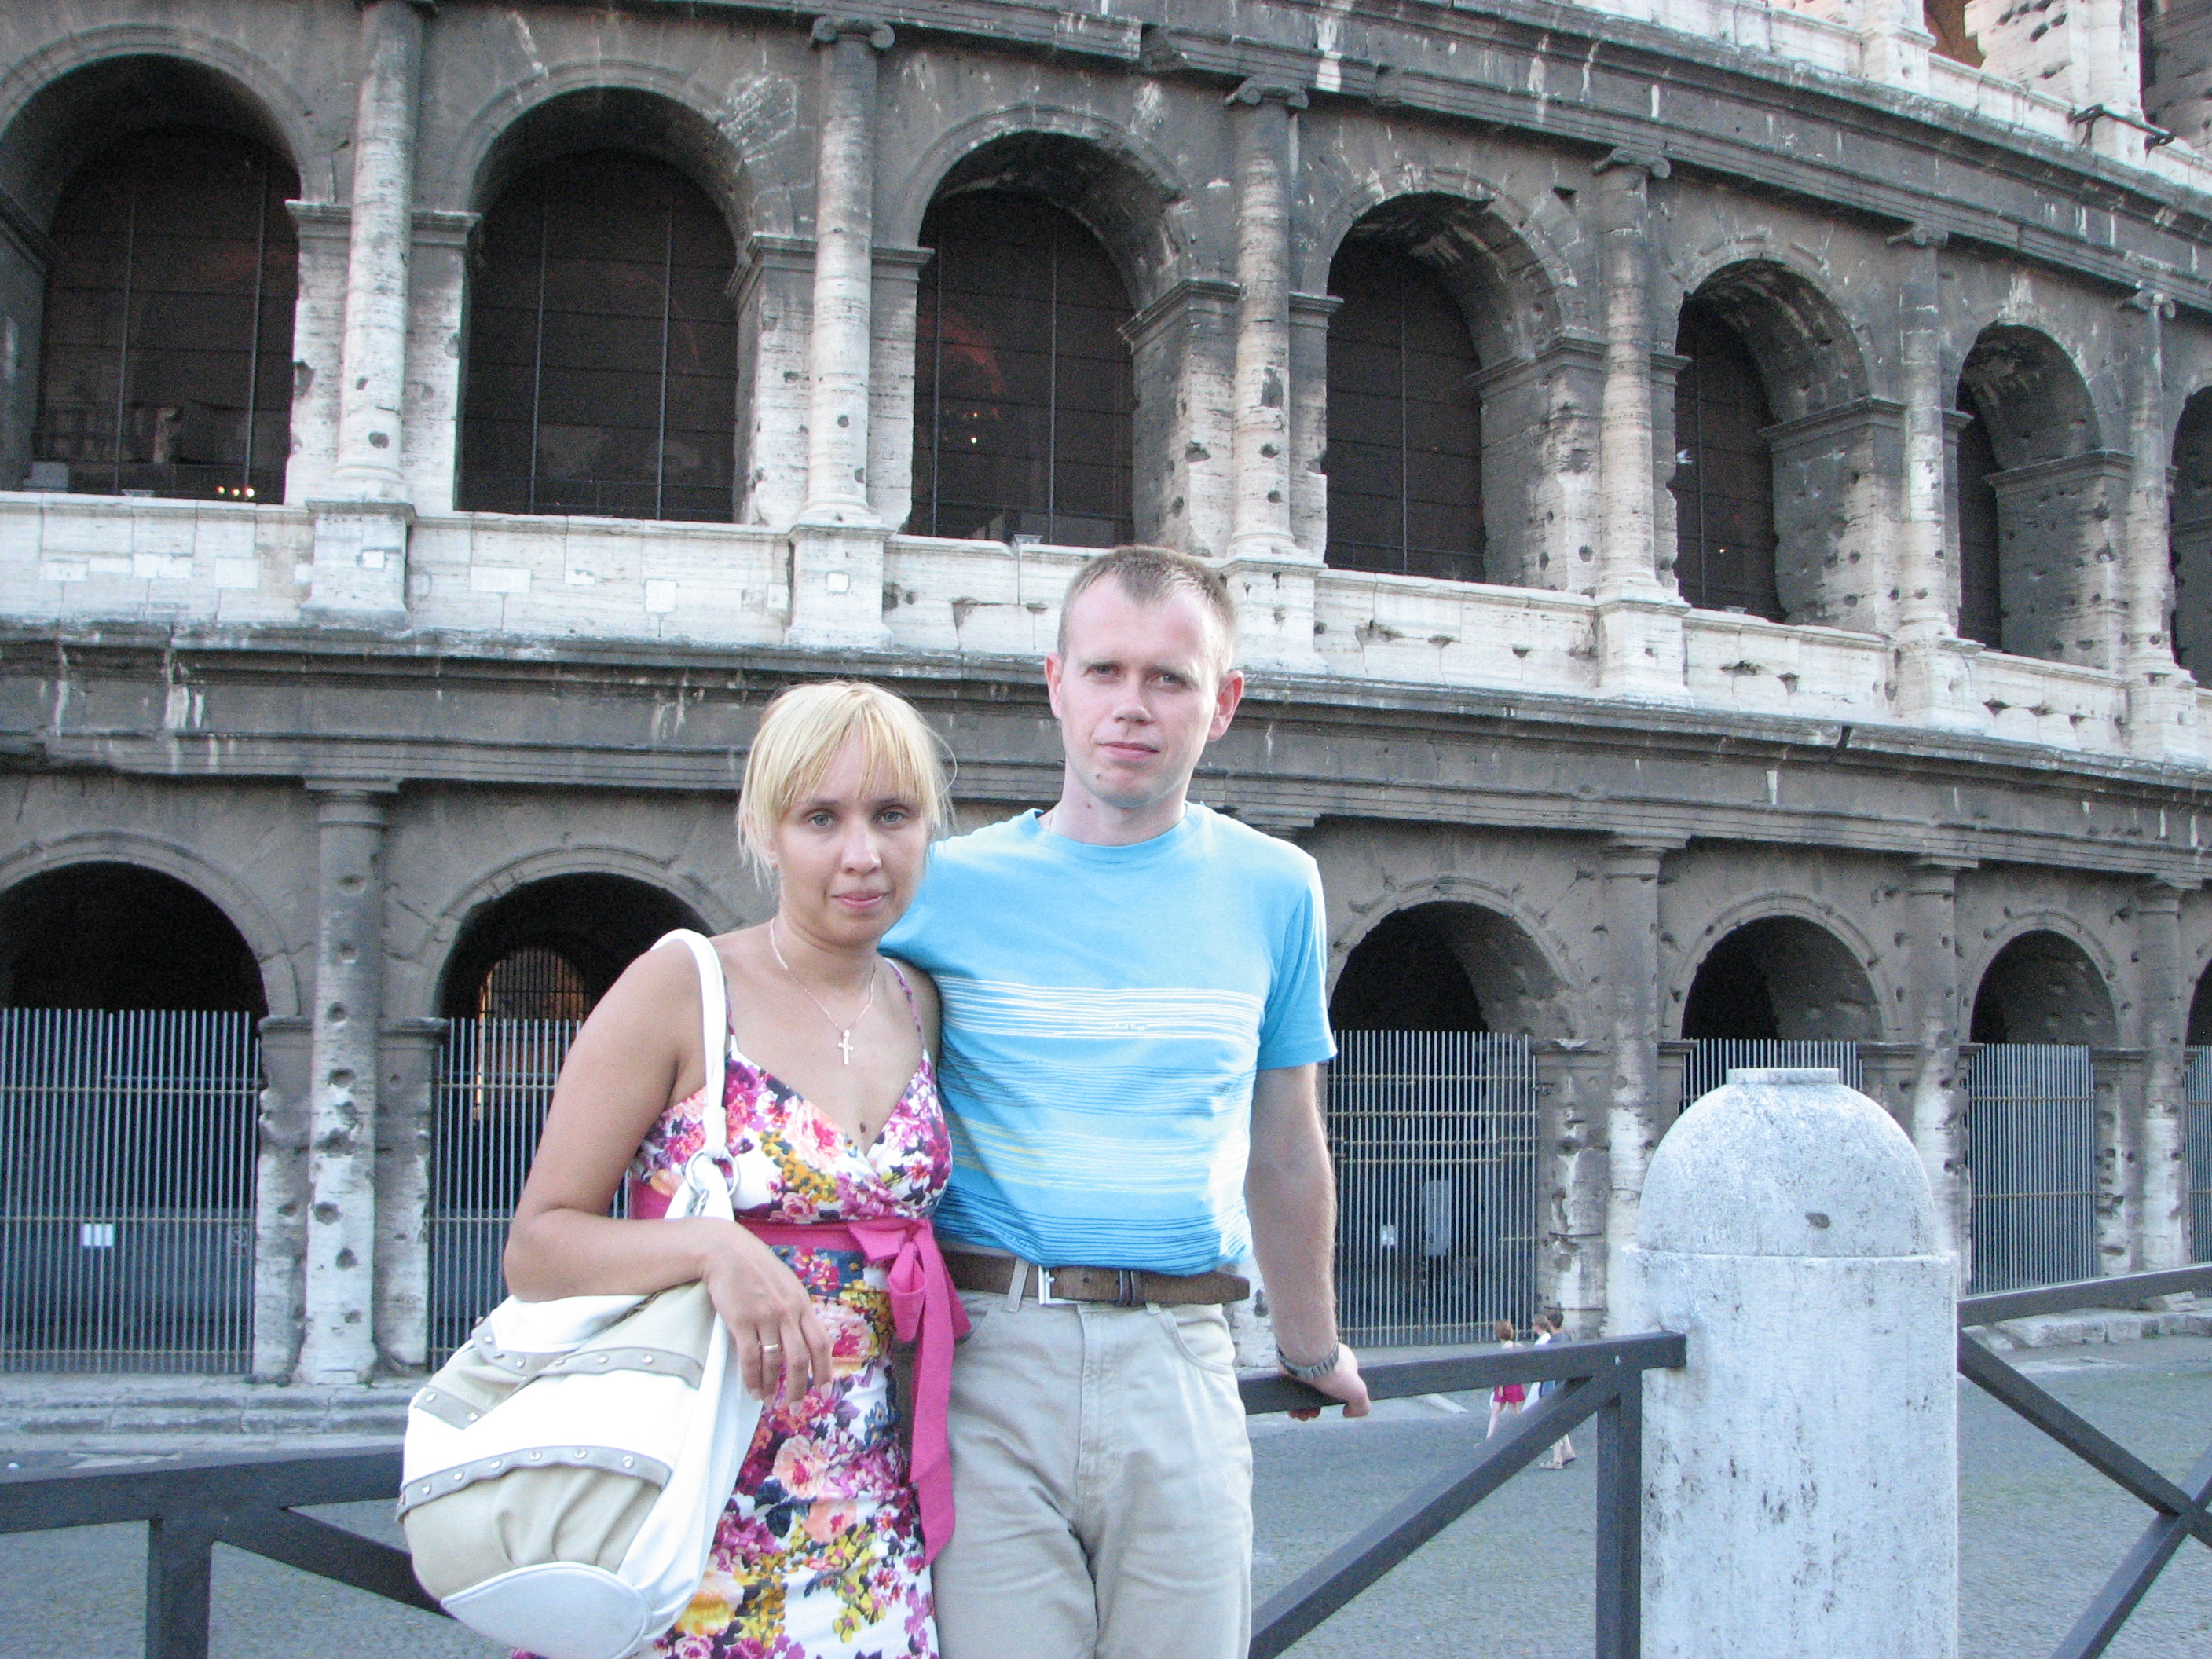 A married couple near Coliseum in Rome, Italy, European Union, August 2011, picture 31.